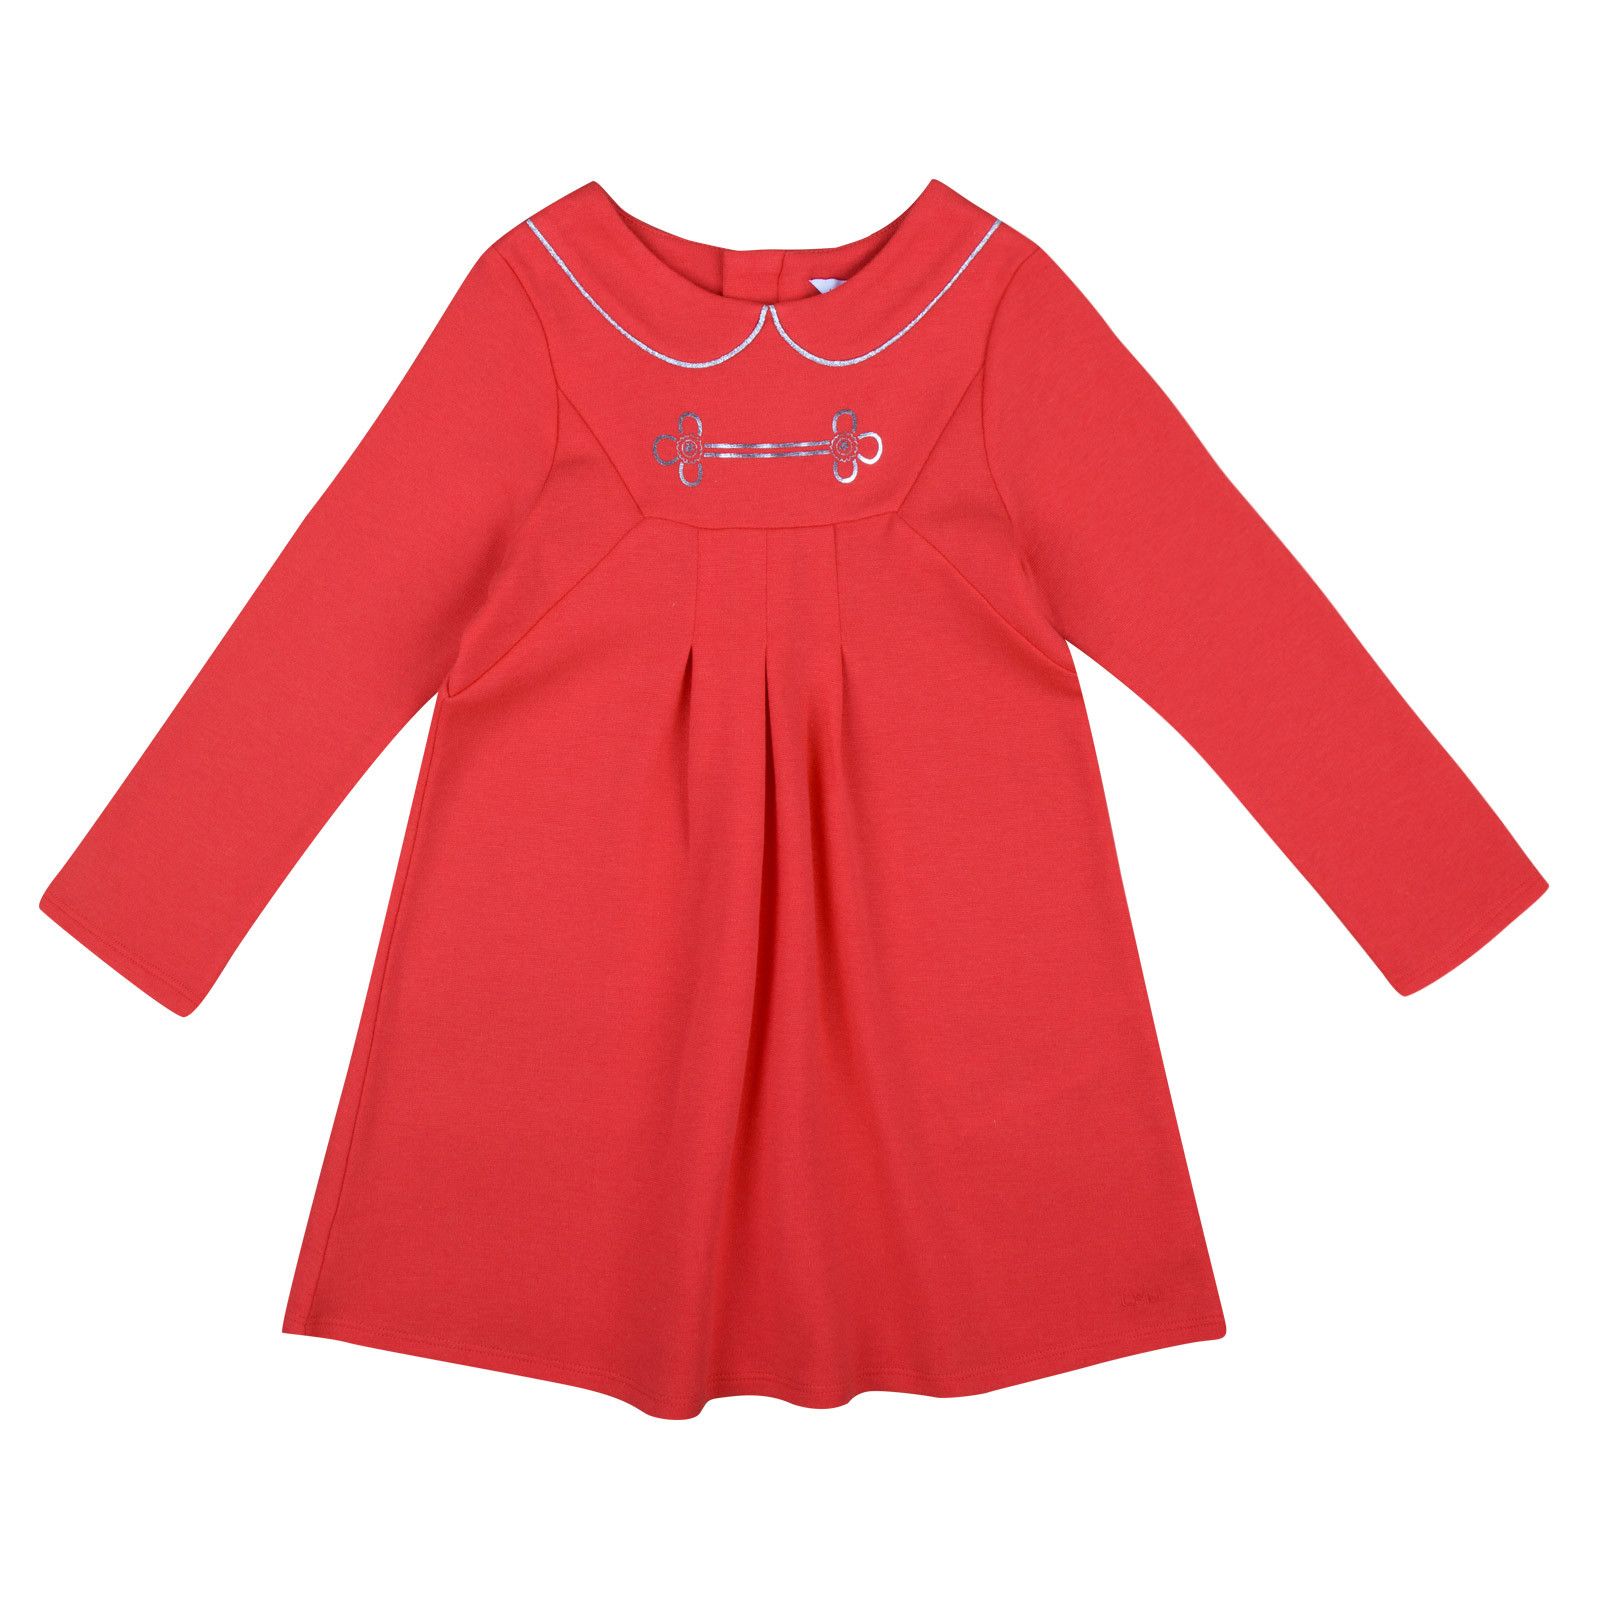 Baby Girls Coral Pink Jersey Dress With Collar Print - CÉMAROSE | Children's Fashion Store - 1